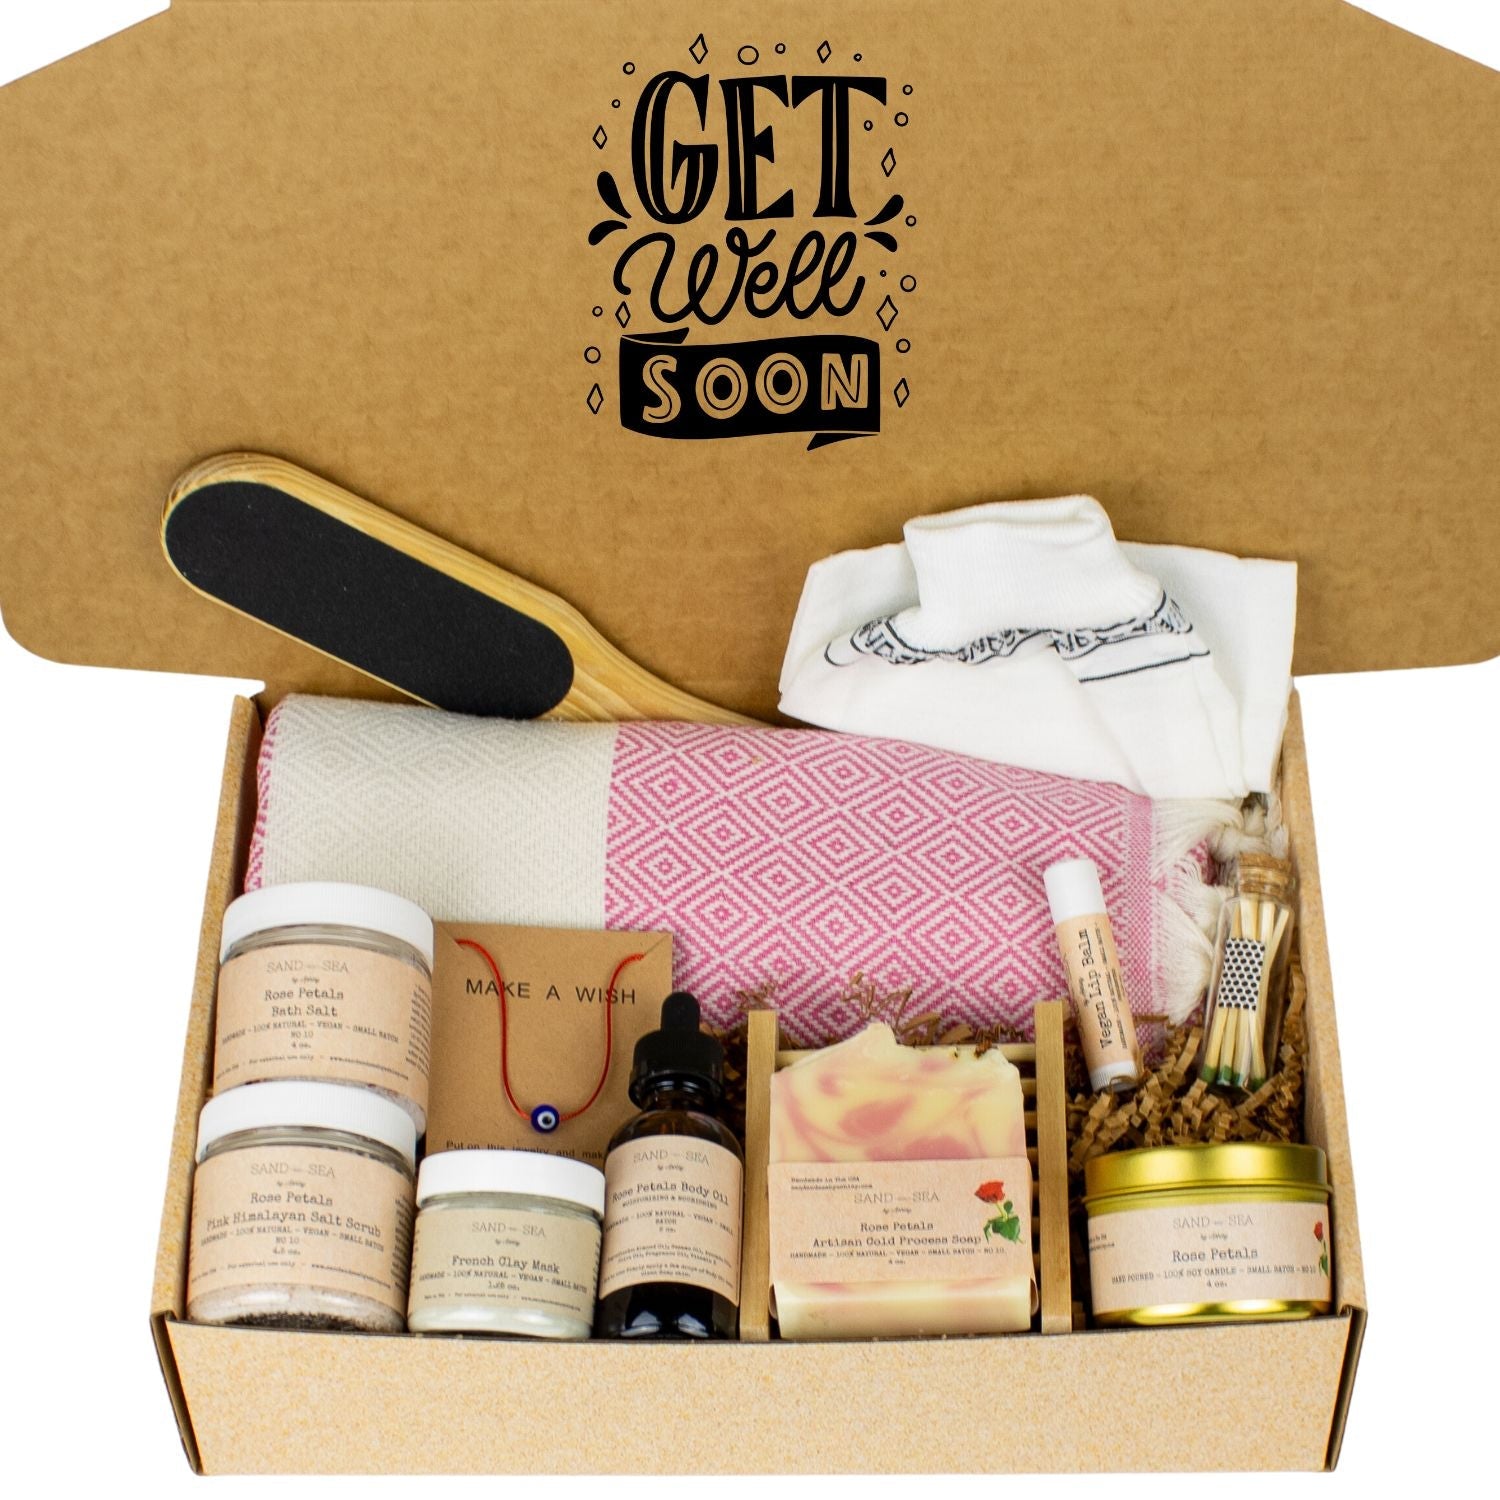 Get Well Soon Gifts for Women - After Surgery Recovery Basket Self Care Kit  with Care Package as the Ideal Present to Help Her Feel Better